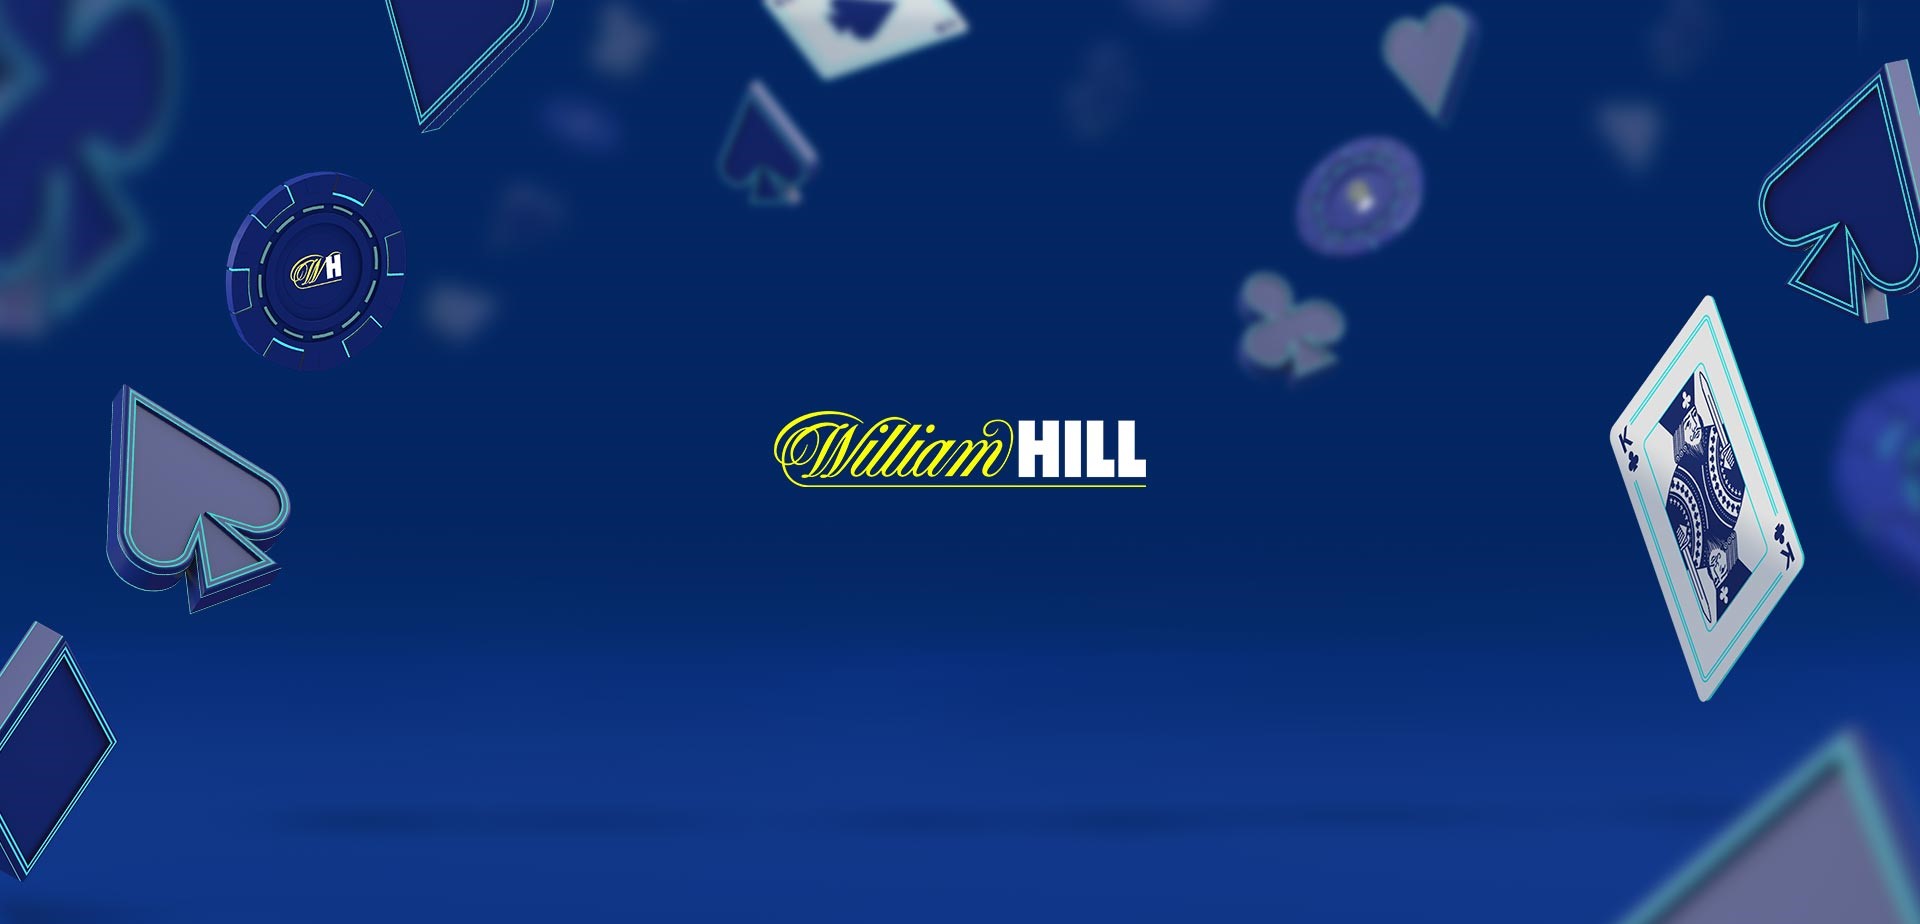 William hill each way betting rules in texas fifa 16 totw investing 101